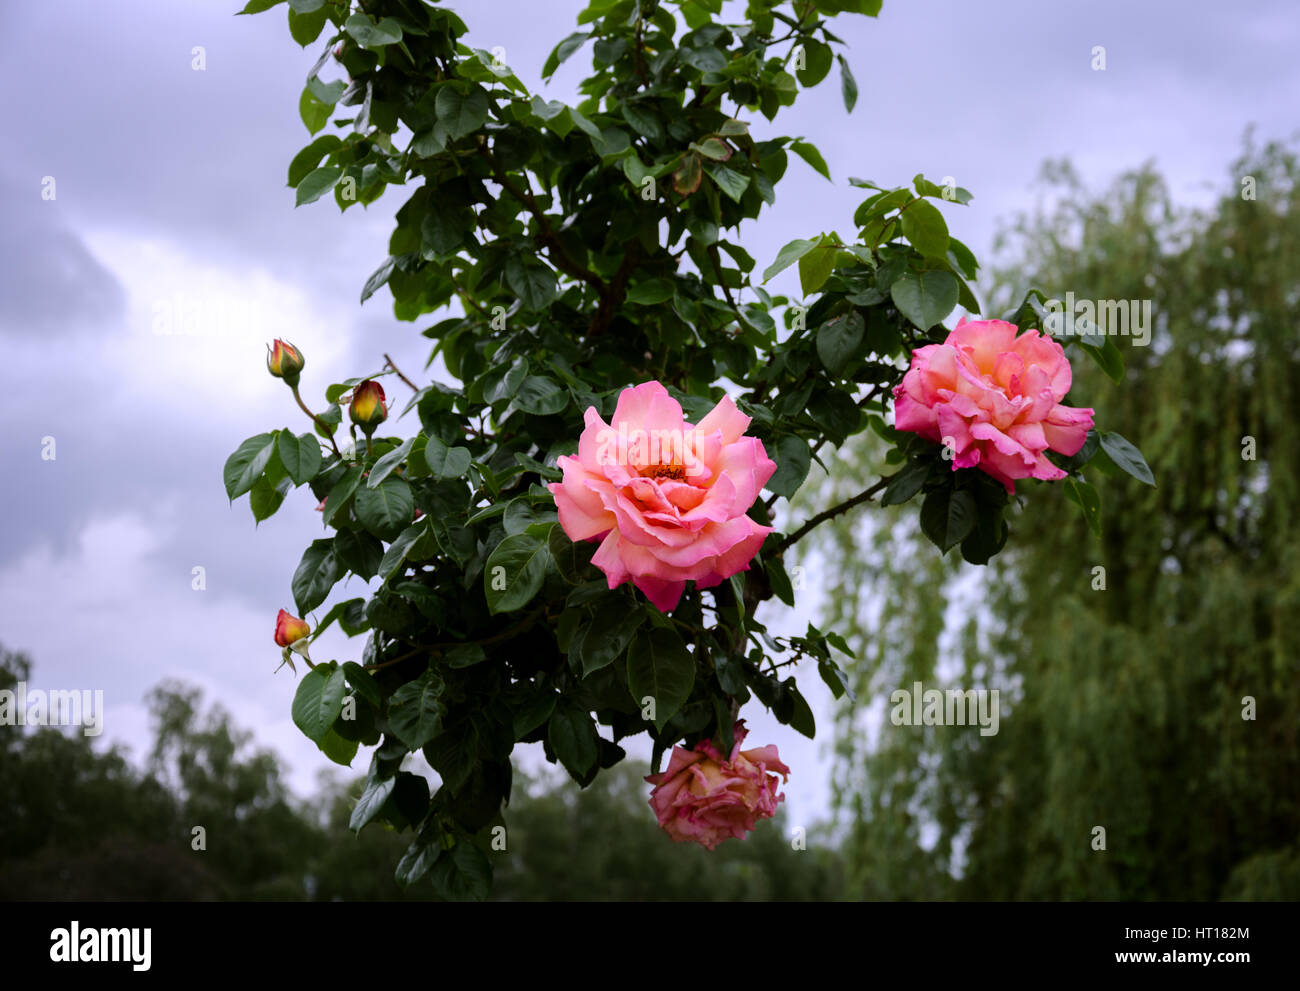 beautiful flowering shrub roses against the sky and weeping willow Stock Photo